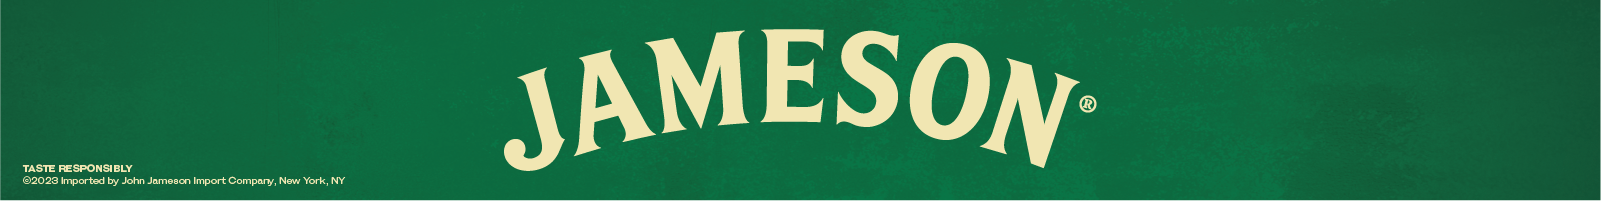 More Info for Jameson_Masterbrand_Logo_Green_1600x200_TMA Banner.png